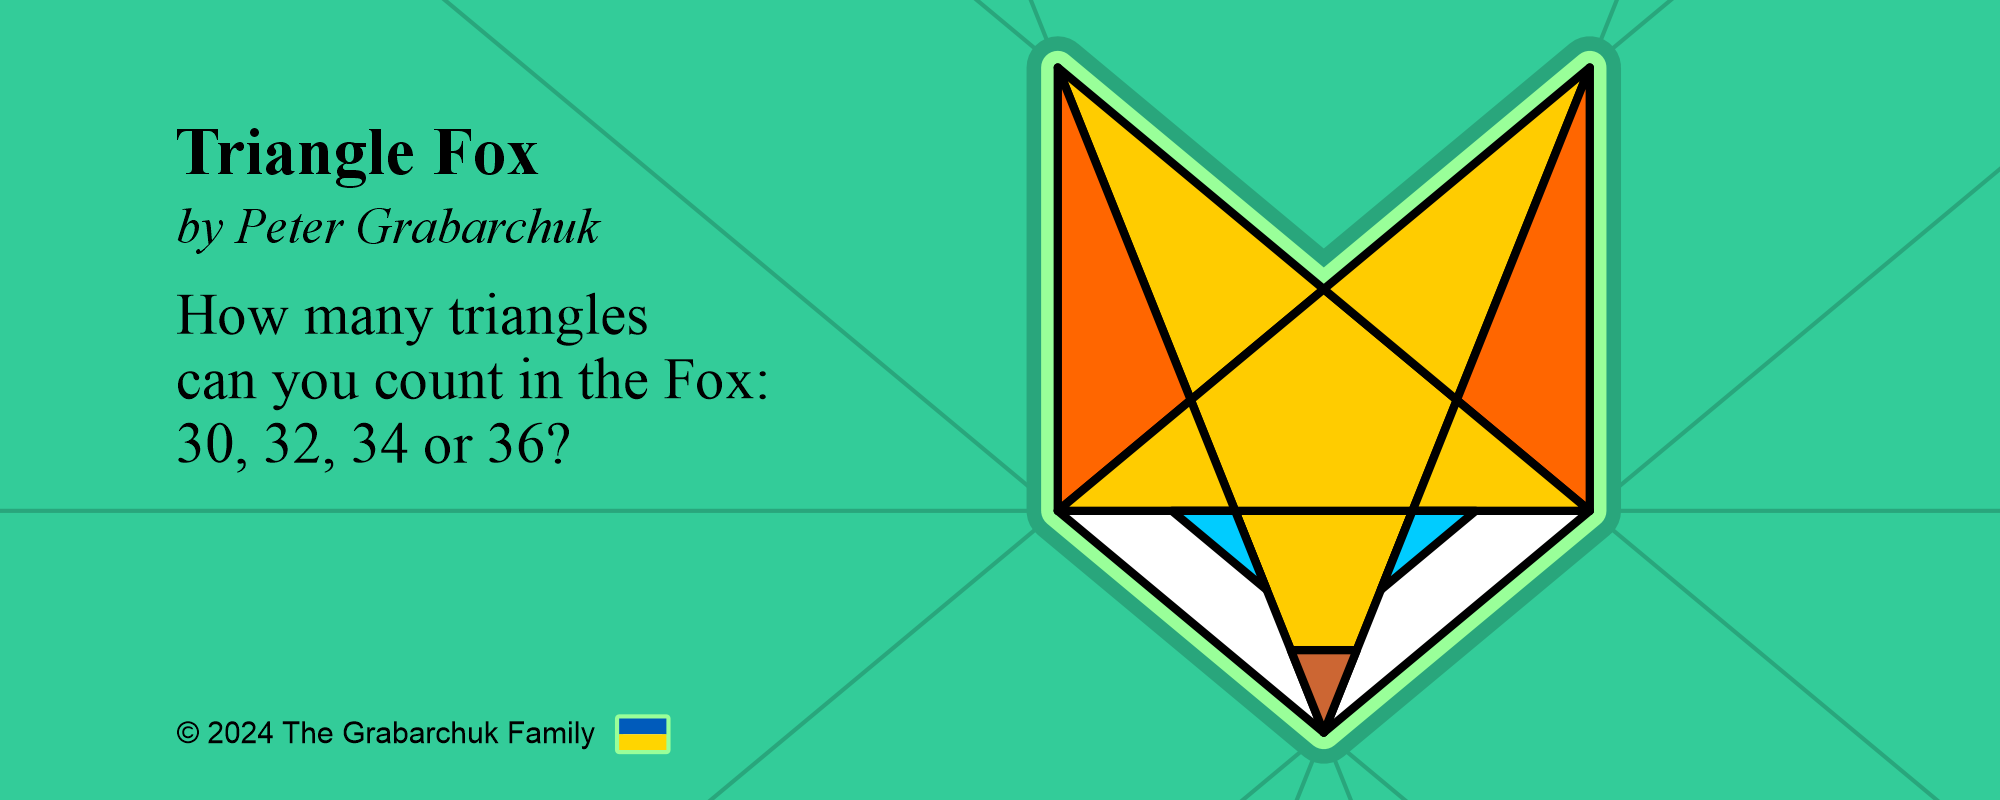 Triangle Fox by Peter Grabarchuk